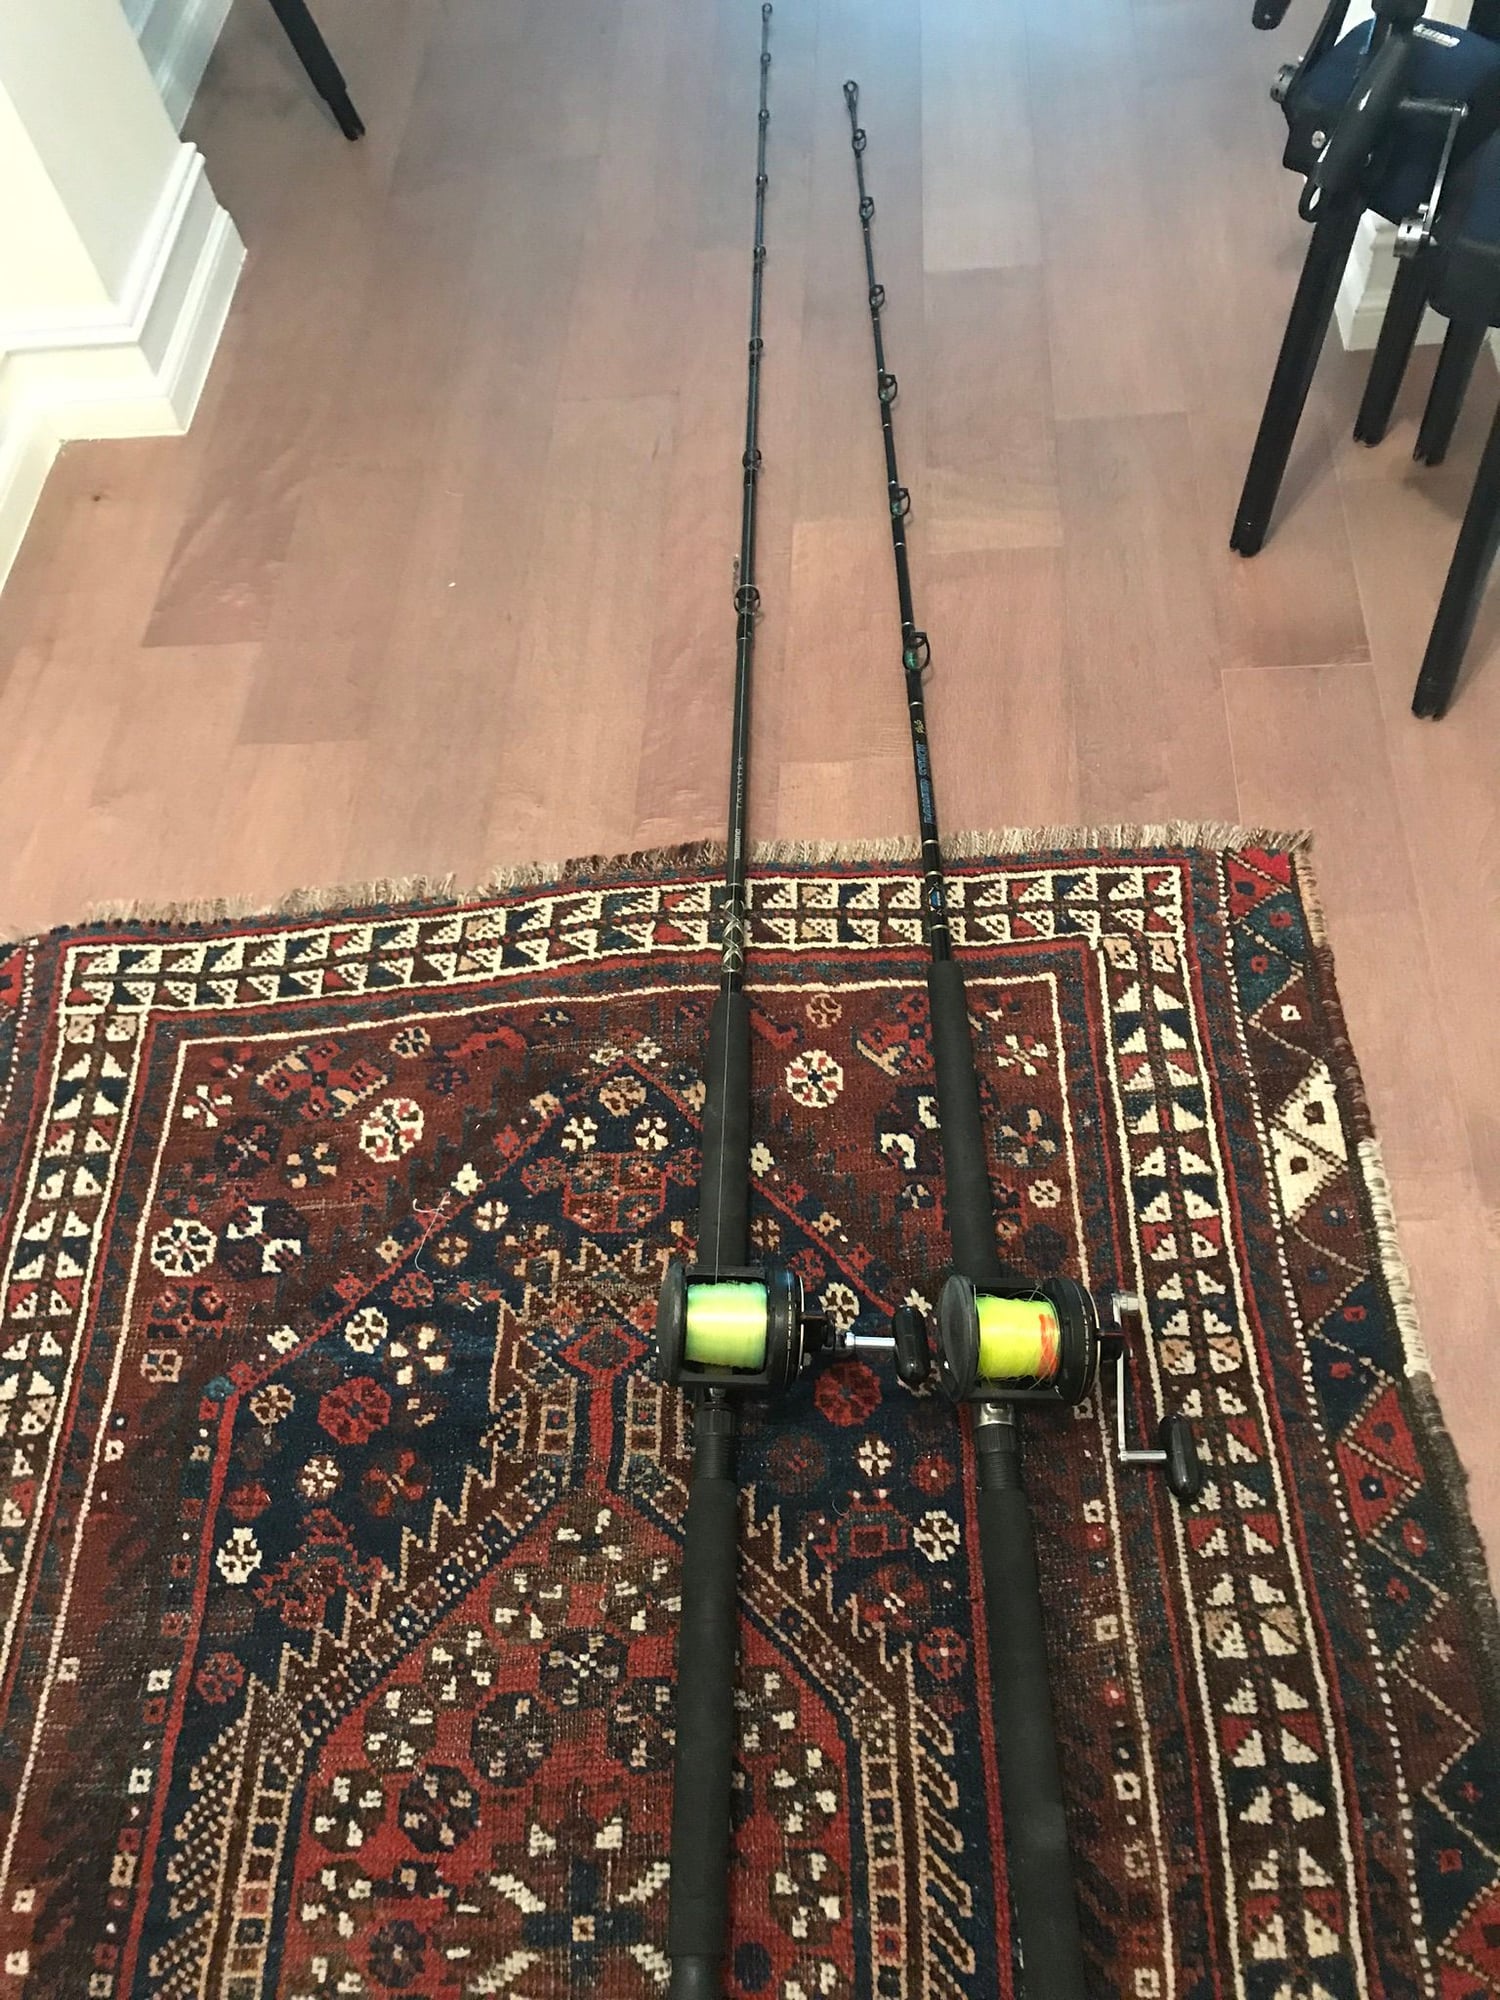 Shimano Rods and Reels for sale - The Hull Truth - Boating and Fishing Forum